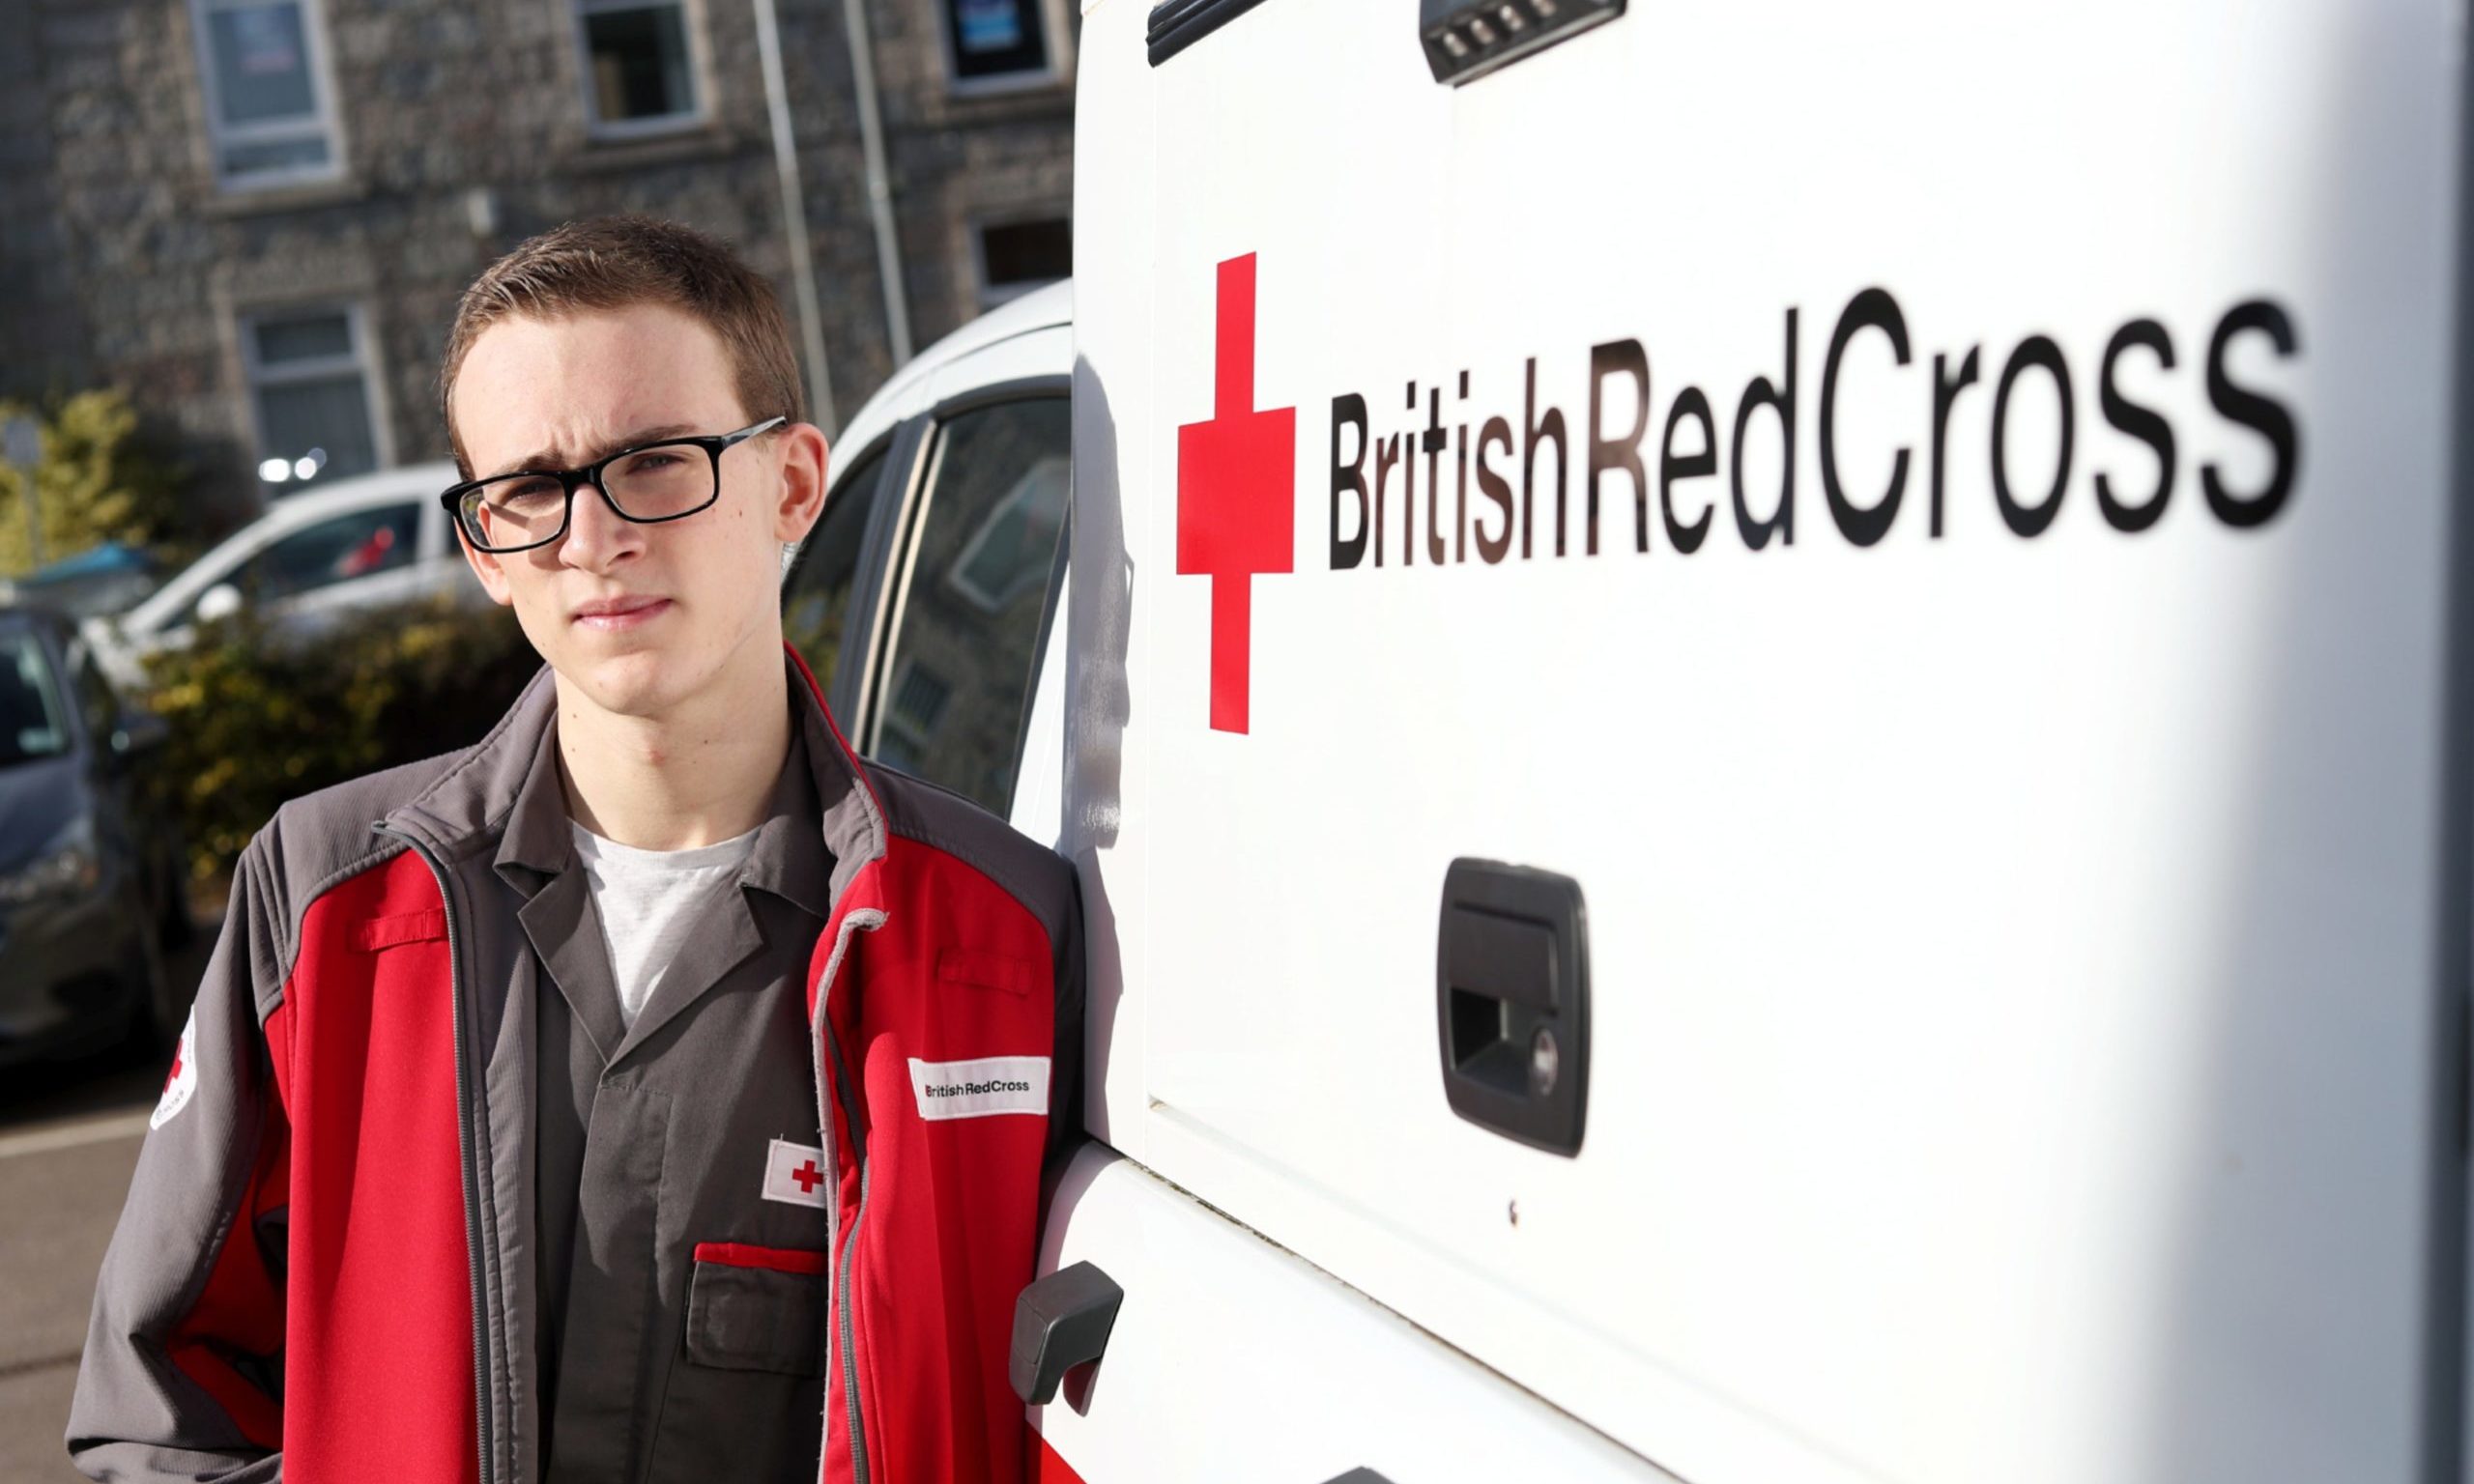 Mr Leitch changed his career goals following his voluntary work with the British Red Cross.